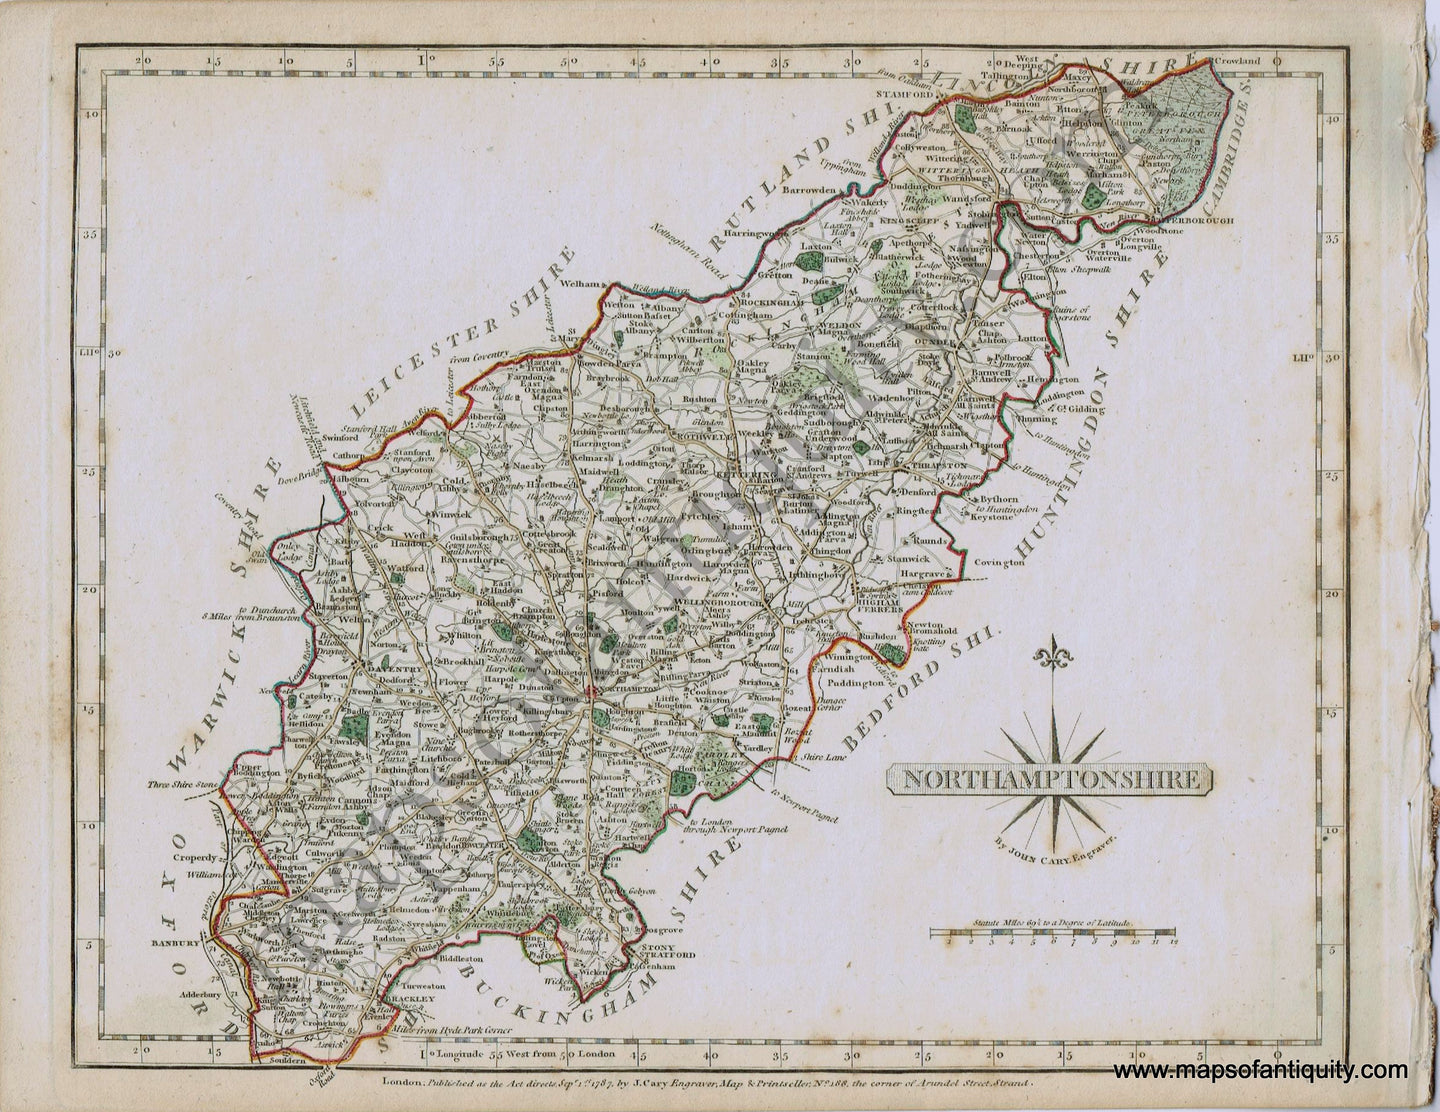 Antique-Hand-Colored-Map-Nothamptonshire-1787-John-Cary-England--1700s-18th-century-Maps-of-Antiquity